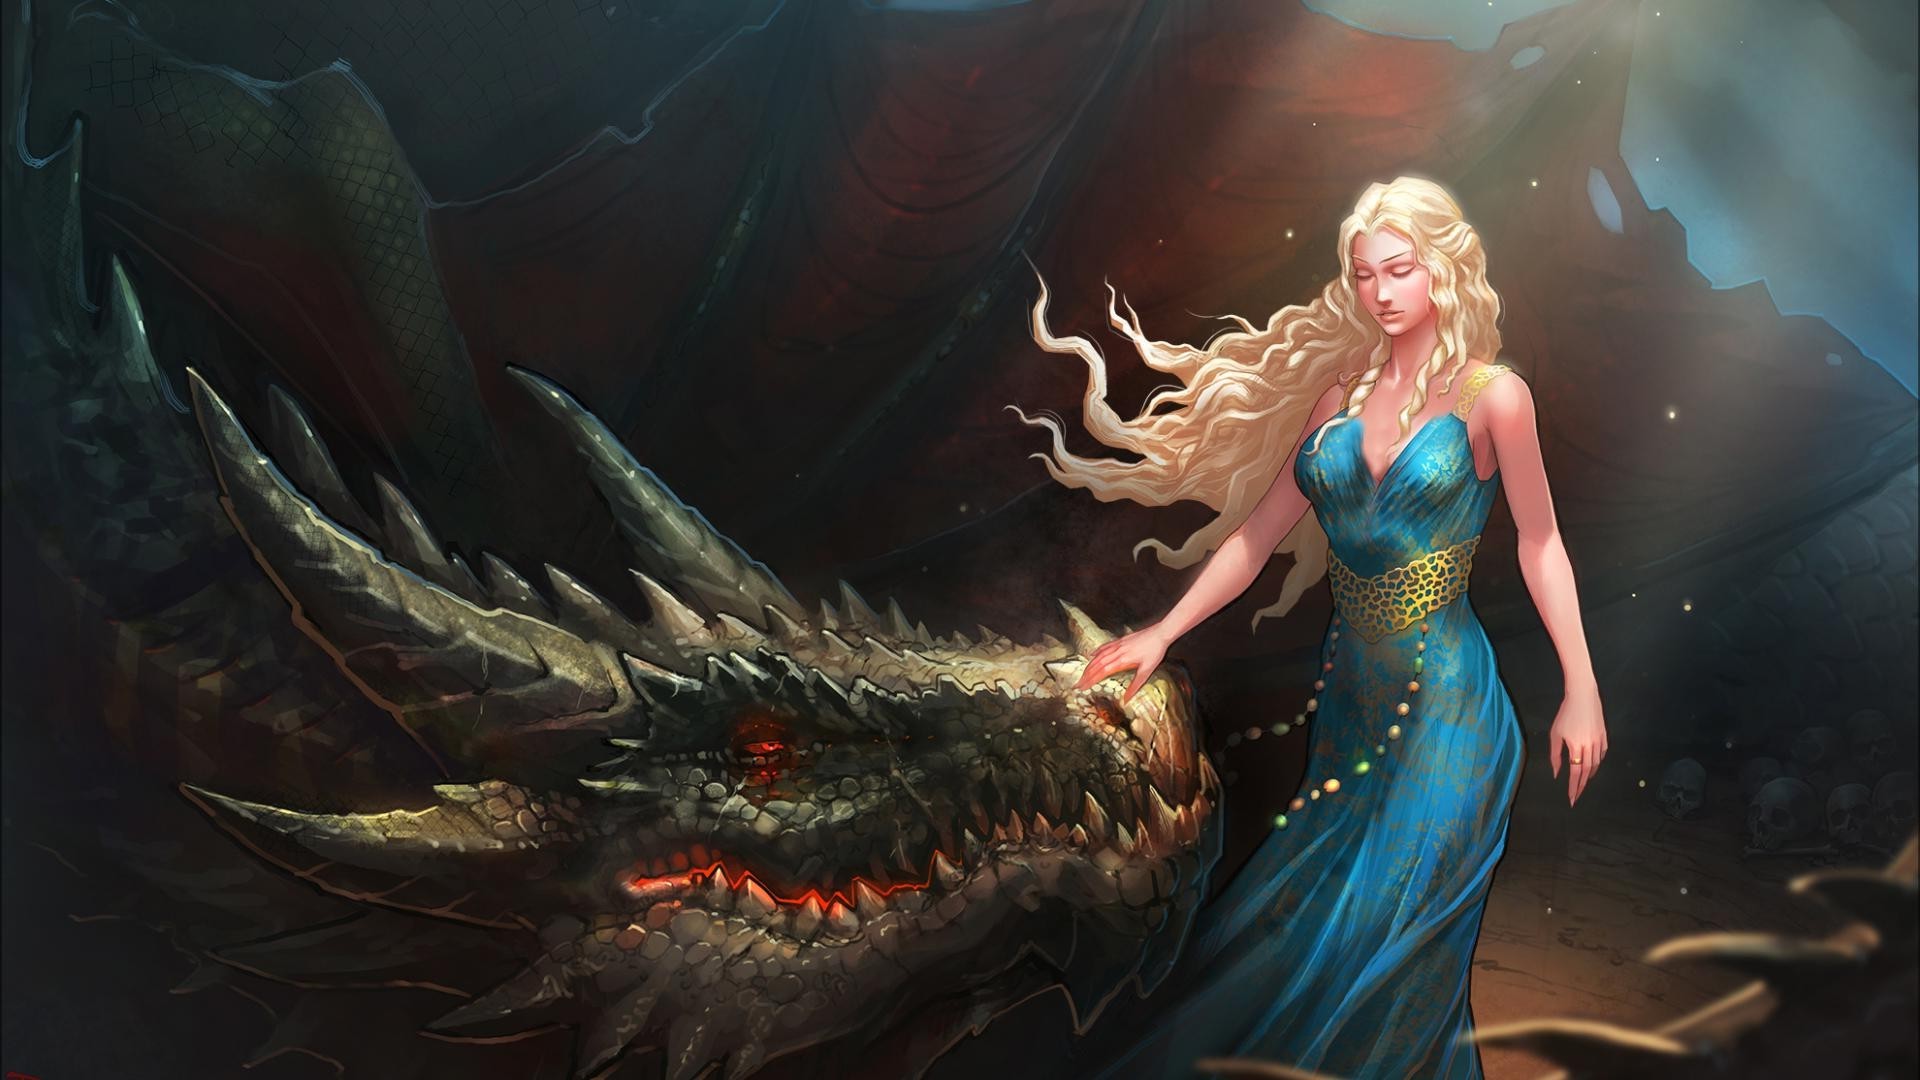 game of thrones art wallpaper,cg artwork,fictional character,mythology,mythical creature,digital compositing